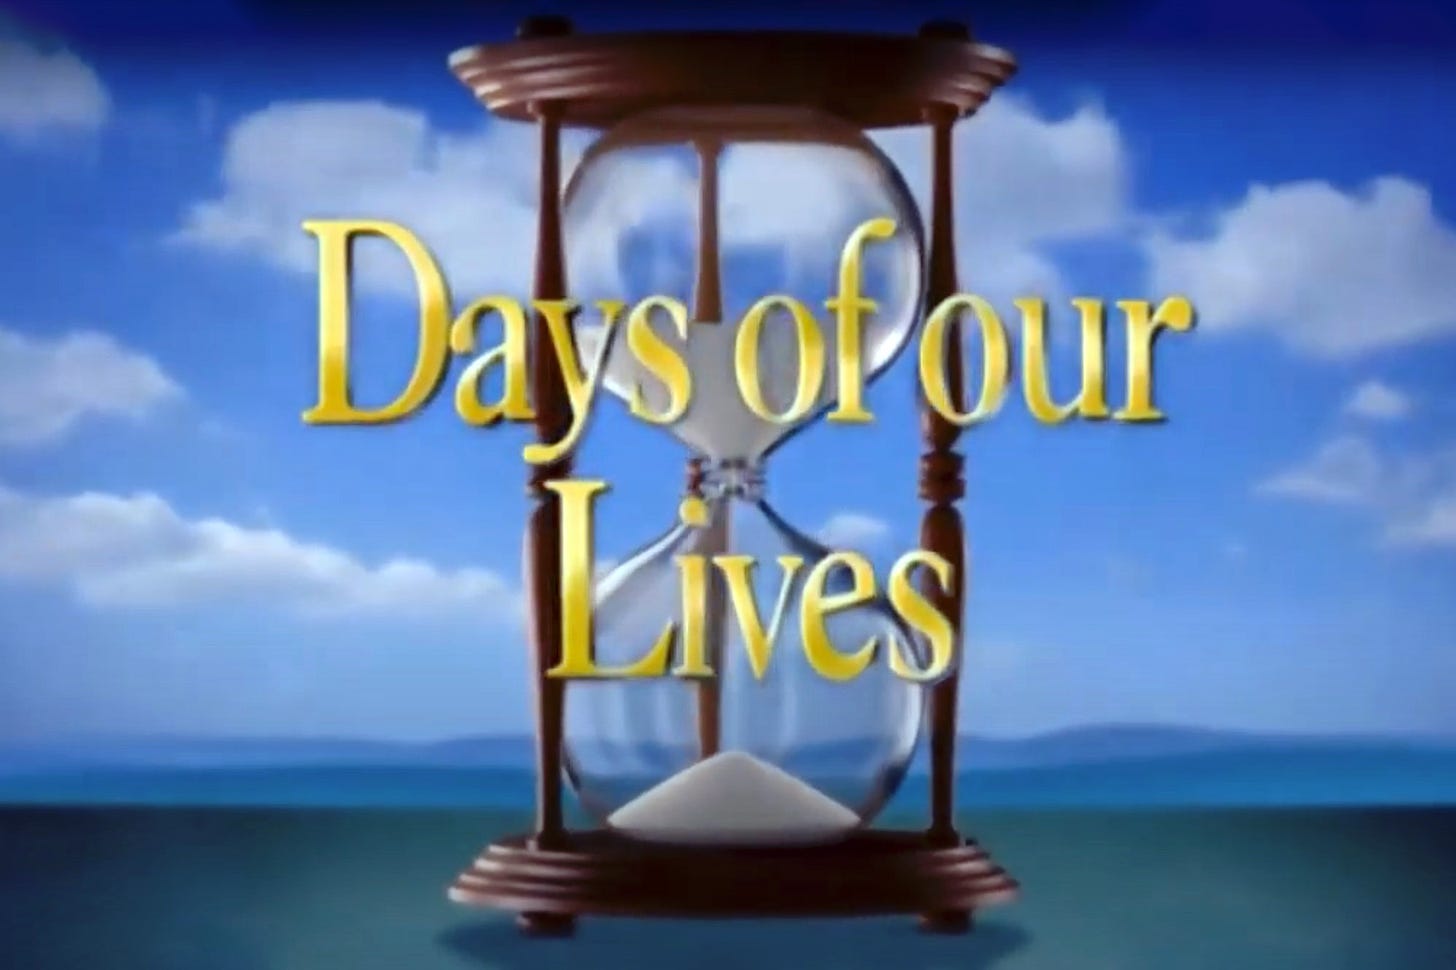 Queen's death interupts final 'Days Of Our Lives' scene